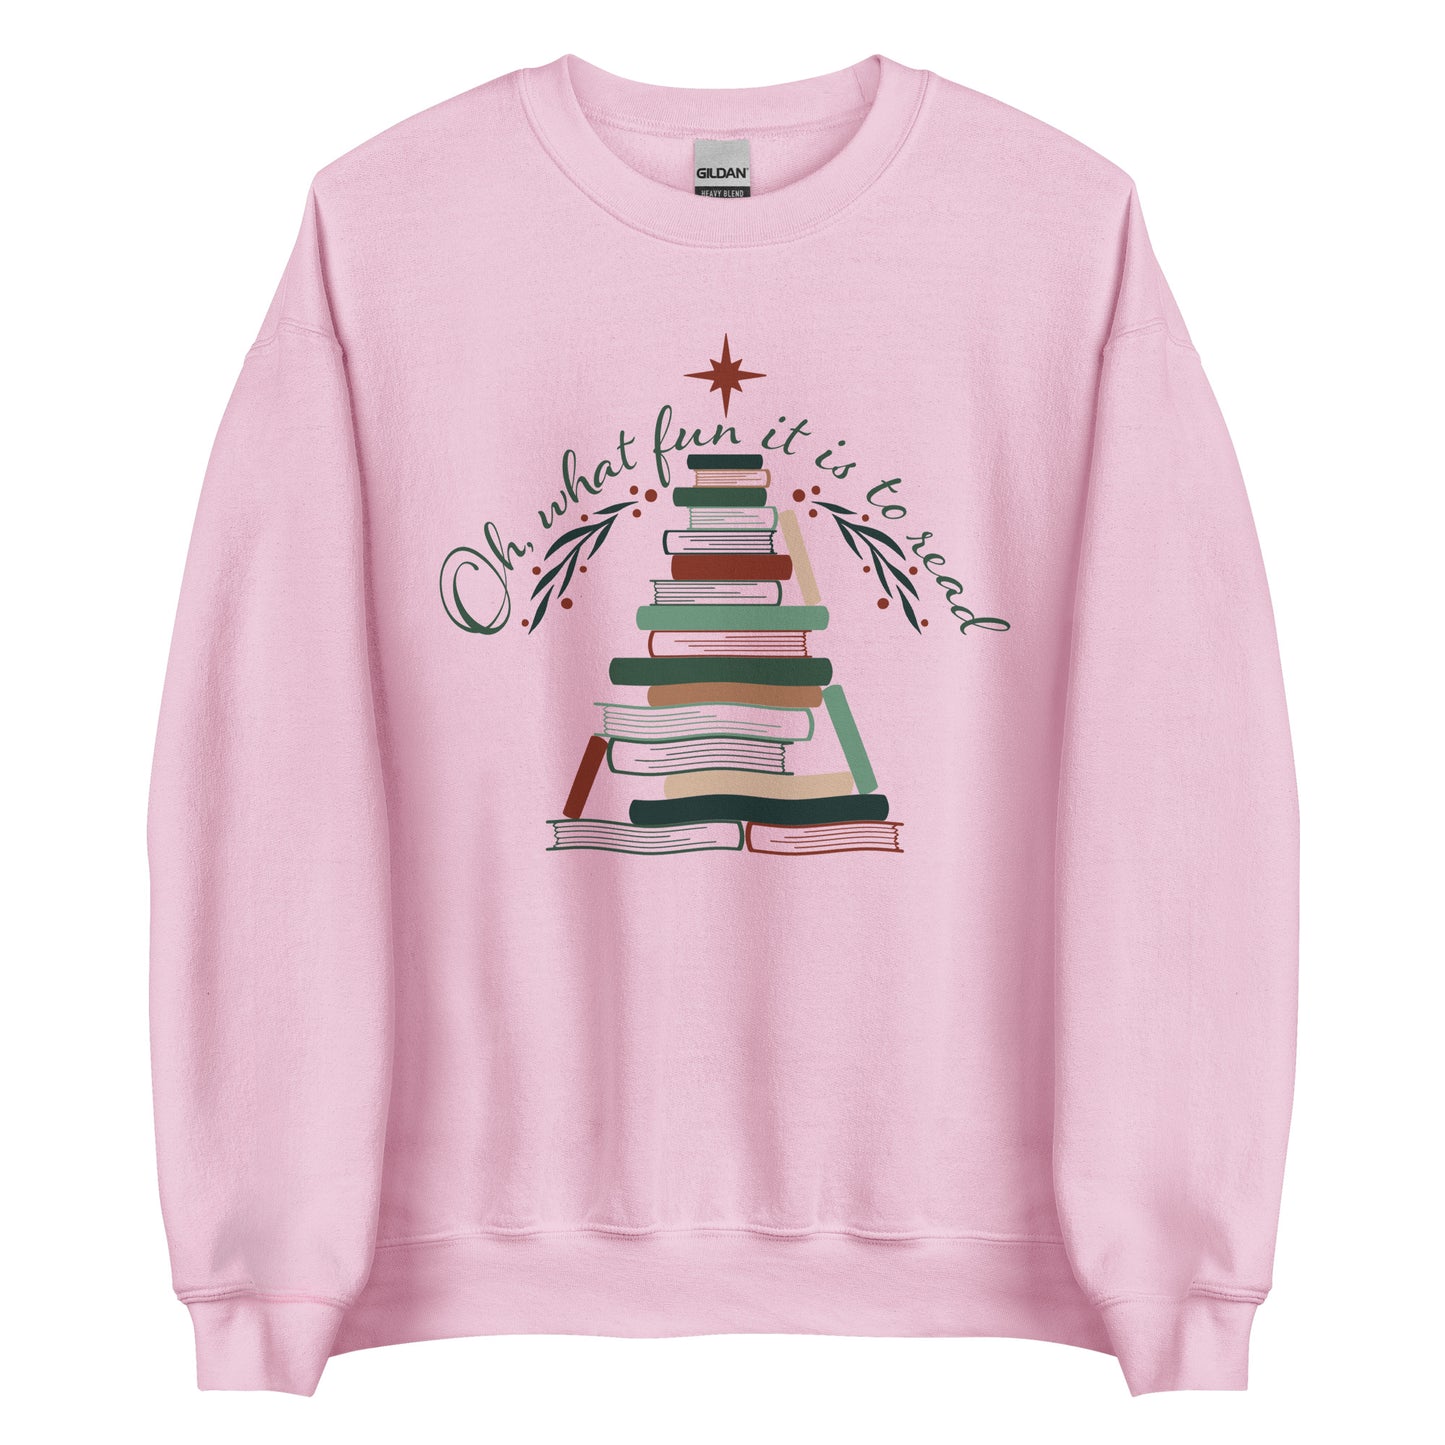 oh what fun it is to read (book tree) sweatshirt